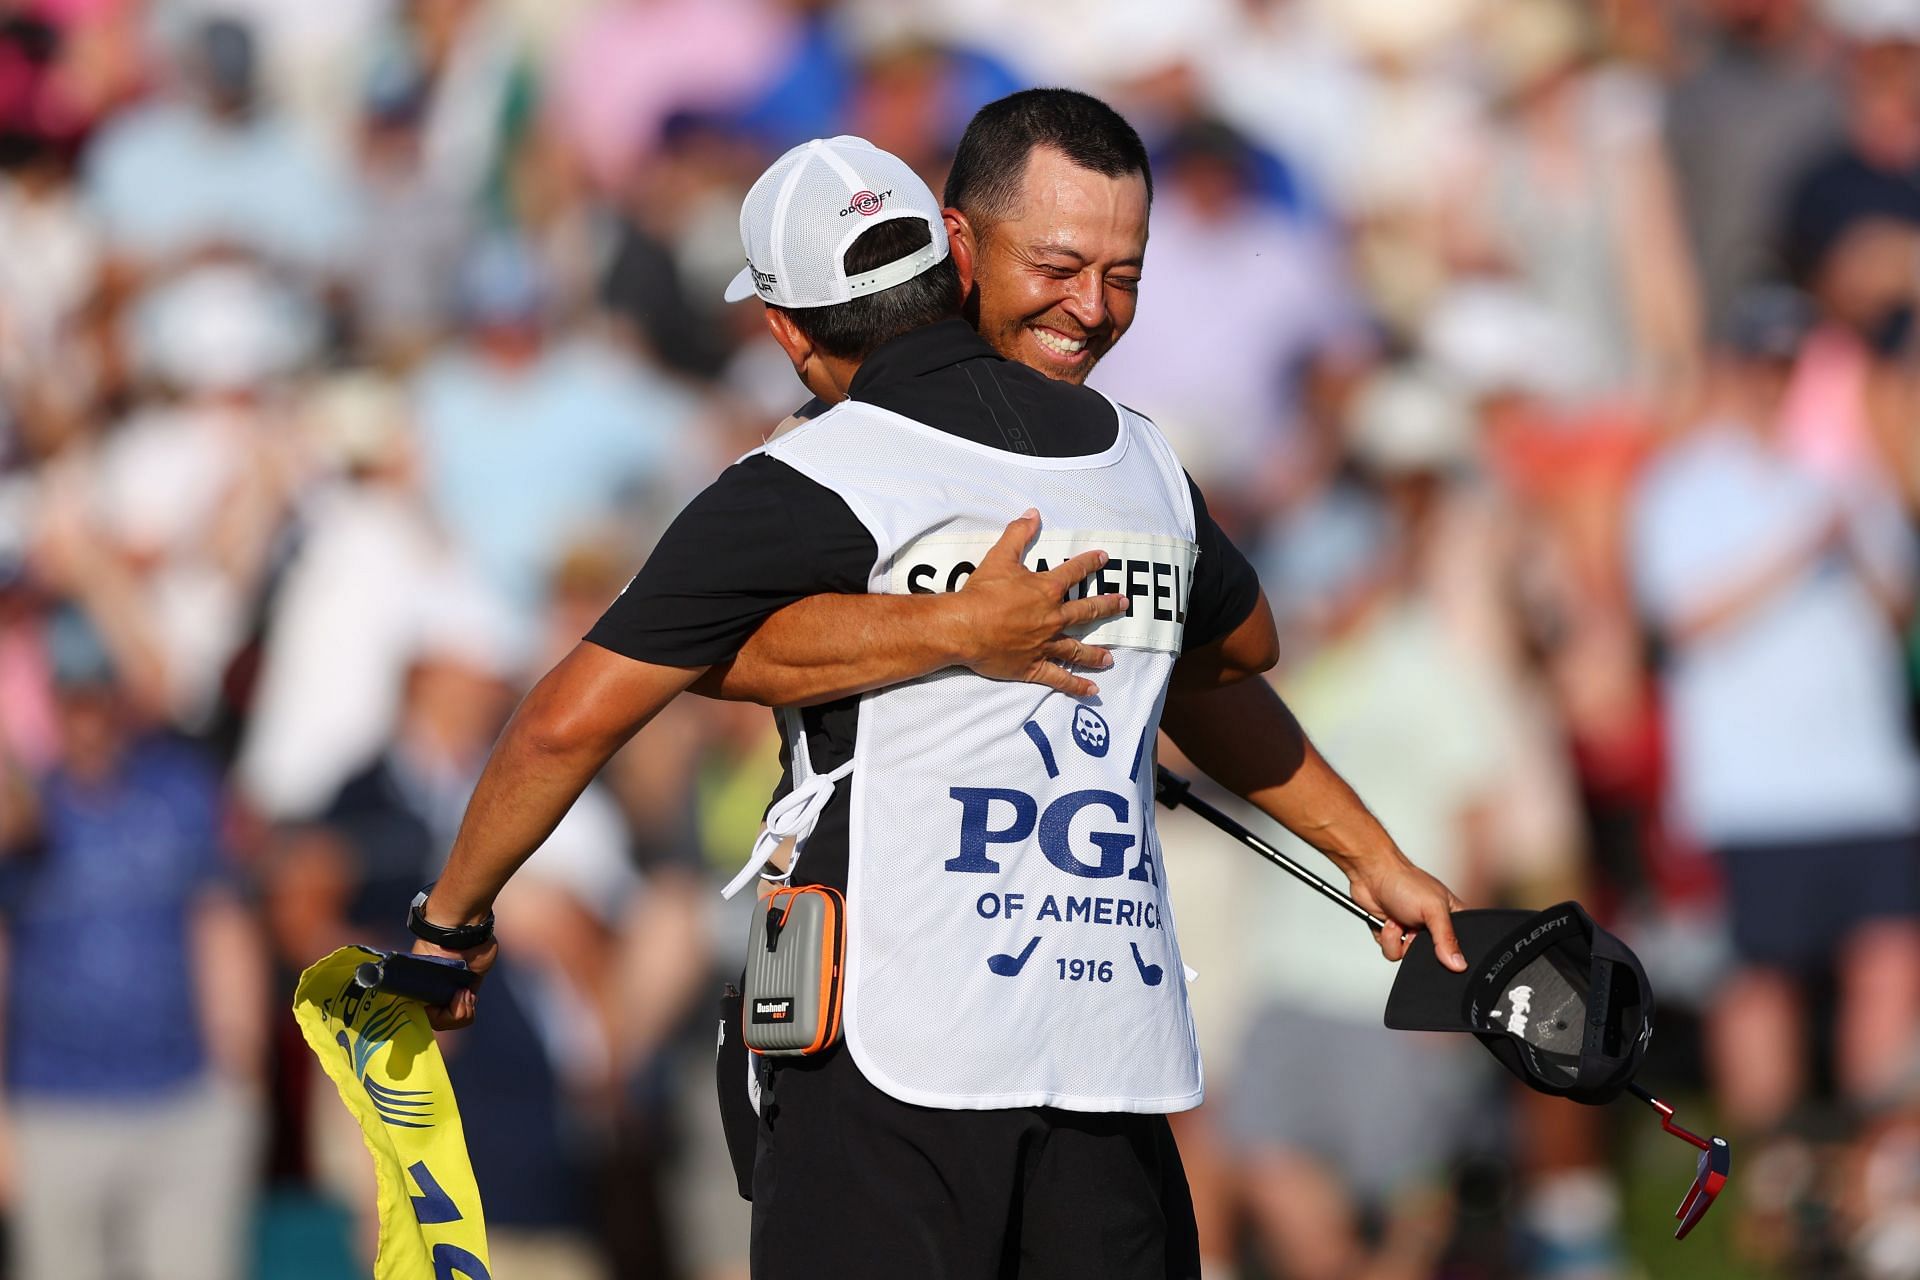 Xander Schauffele and his caddie celebrating the win